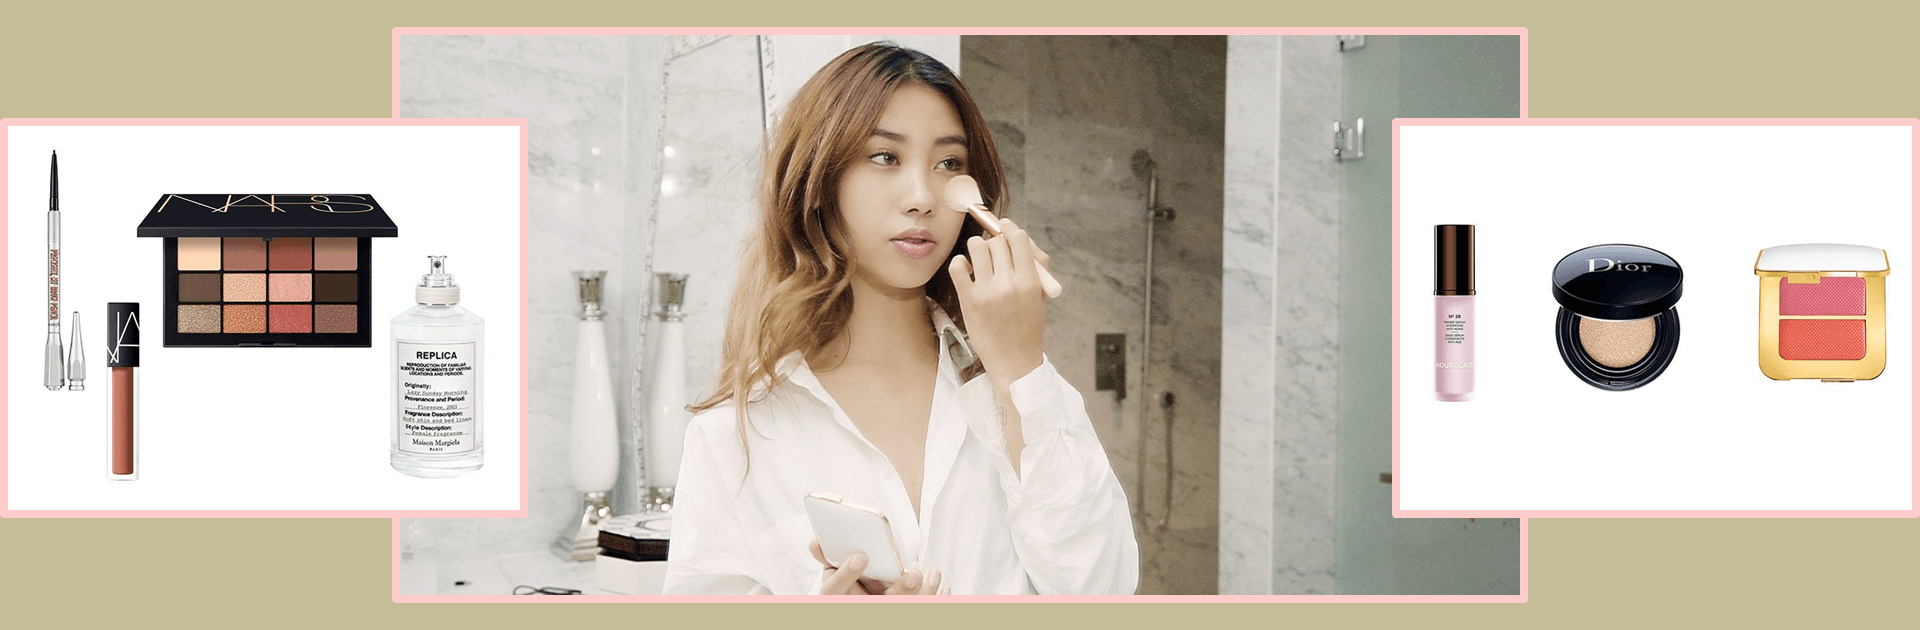 ELLE’s Guide to the Everyday Morning Beauty Routine